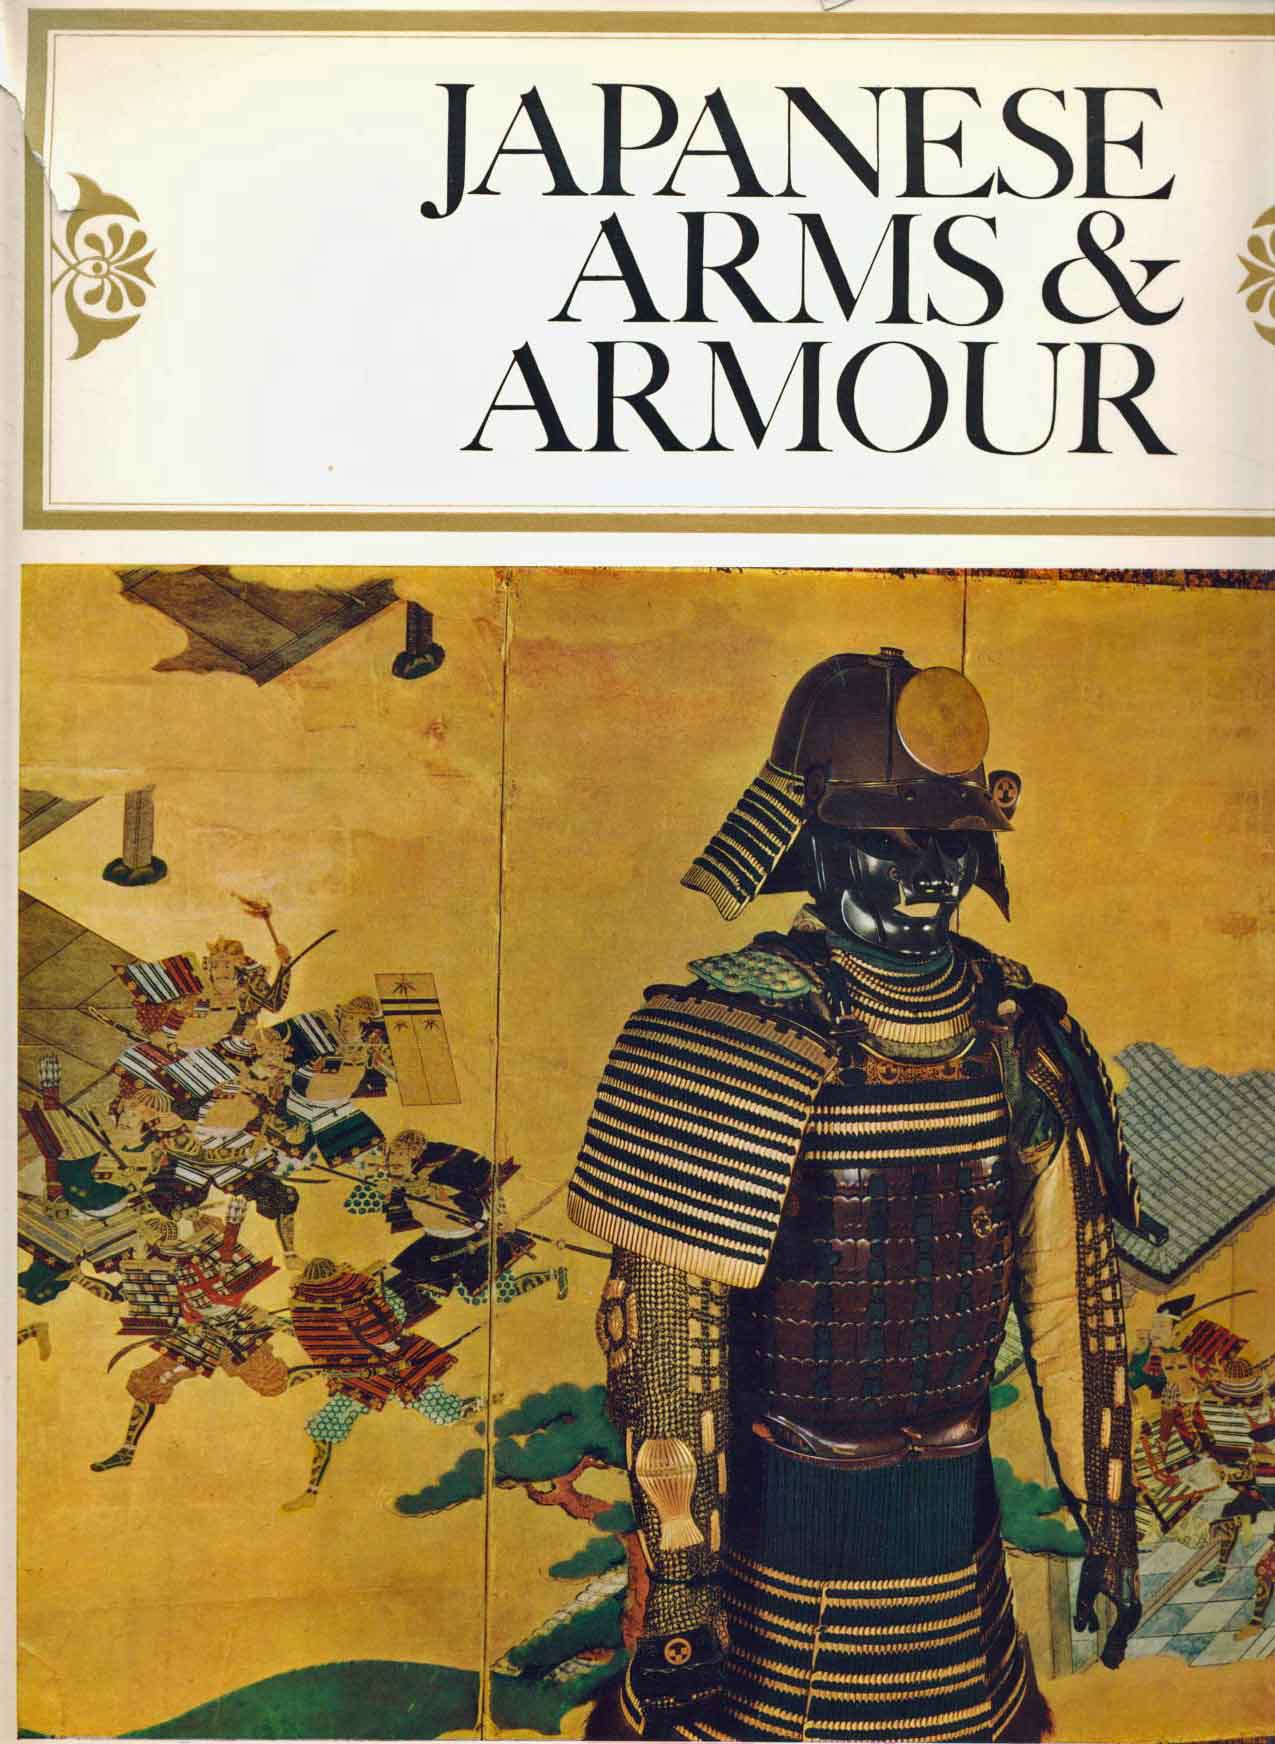 Robinson, H. Russell - Japanese Arms & Armour: Introduction [and Line Drawings]